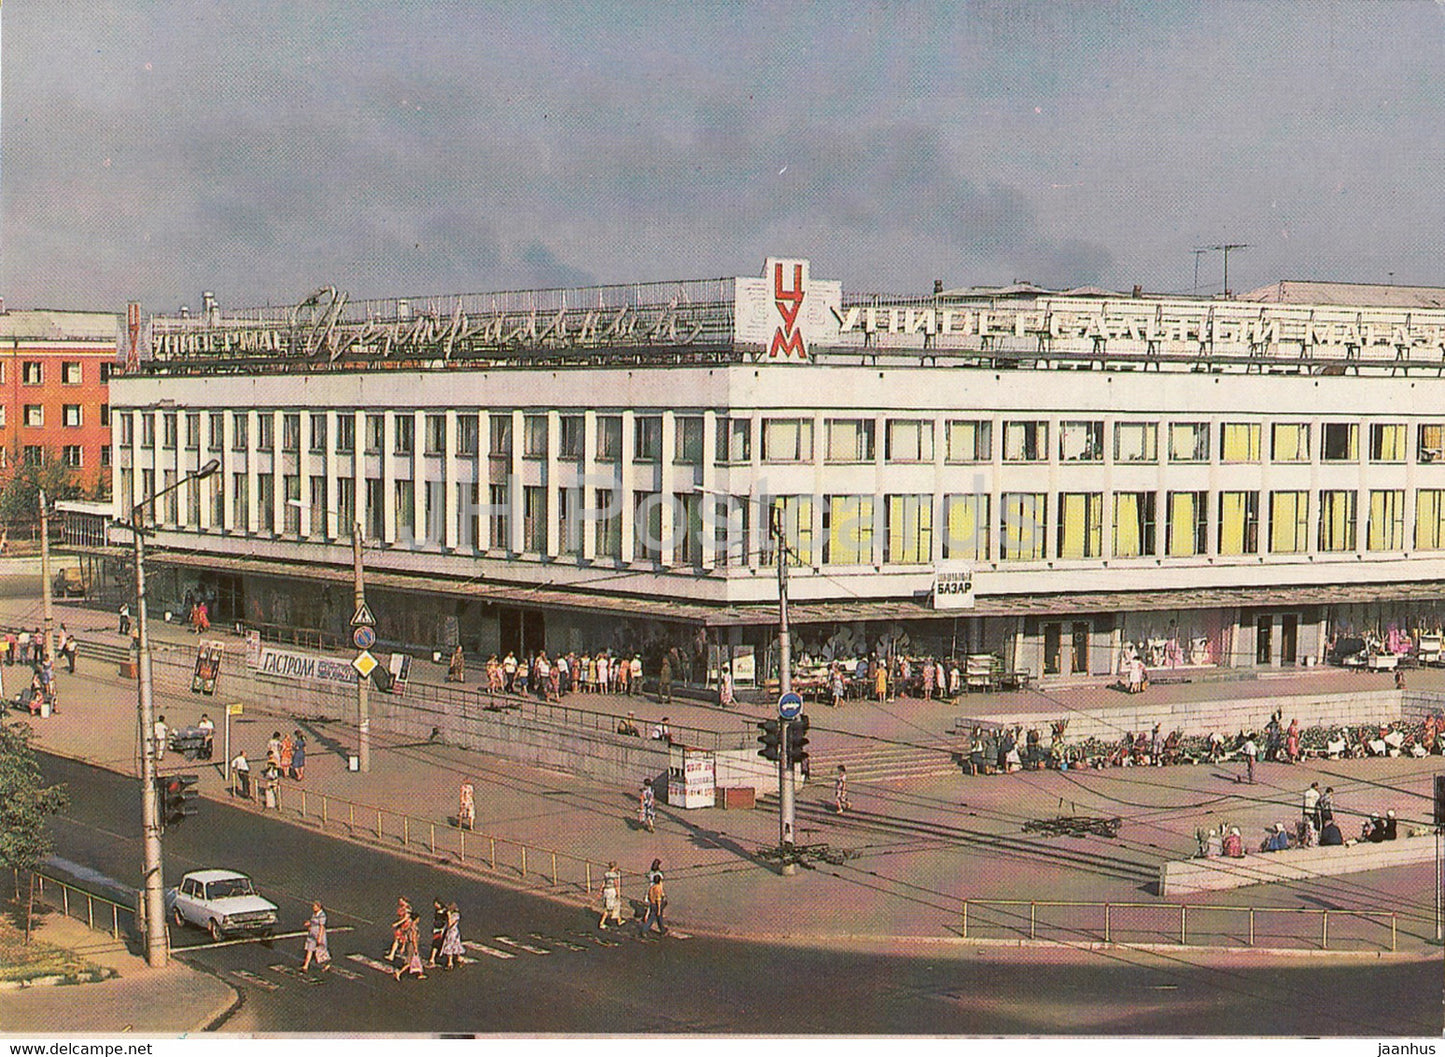 Kirov - Vyatka - central department store - 1983 - Russia USSR - unused - JH Postcards